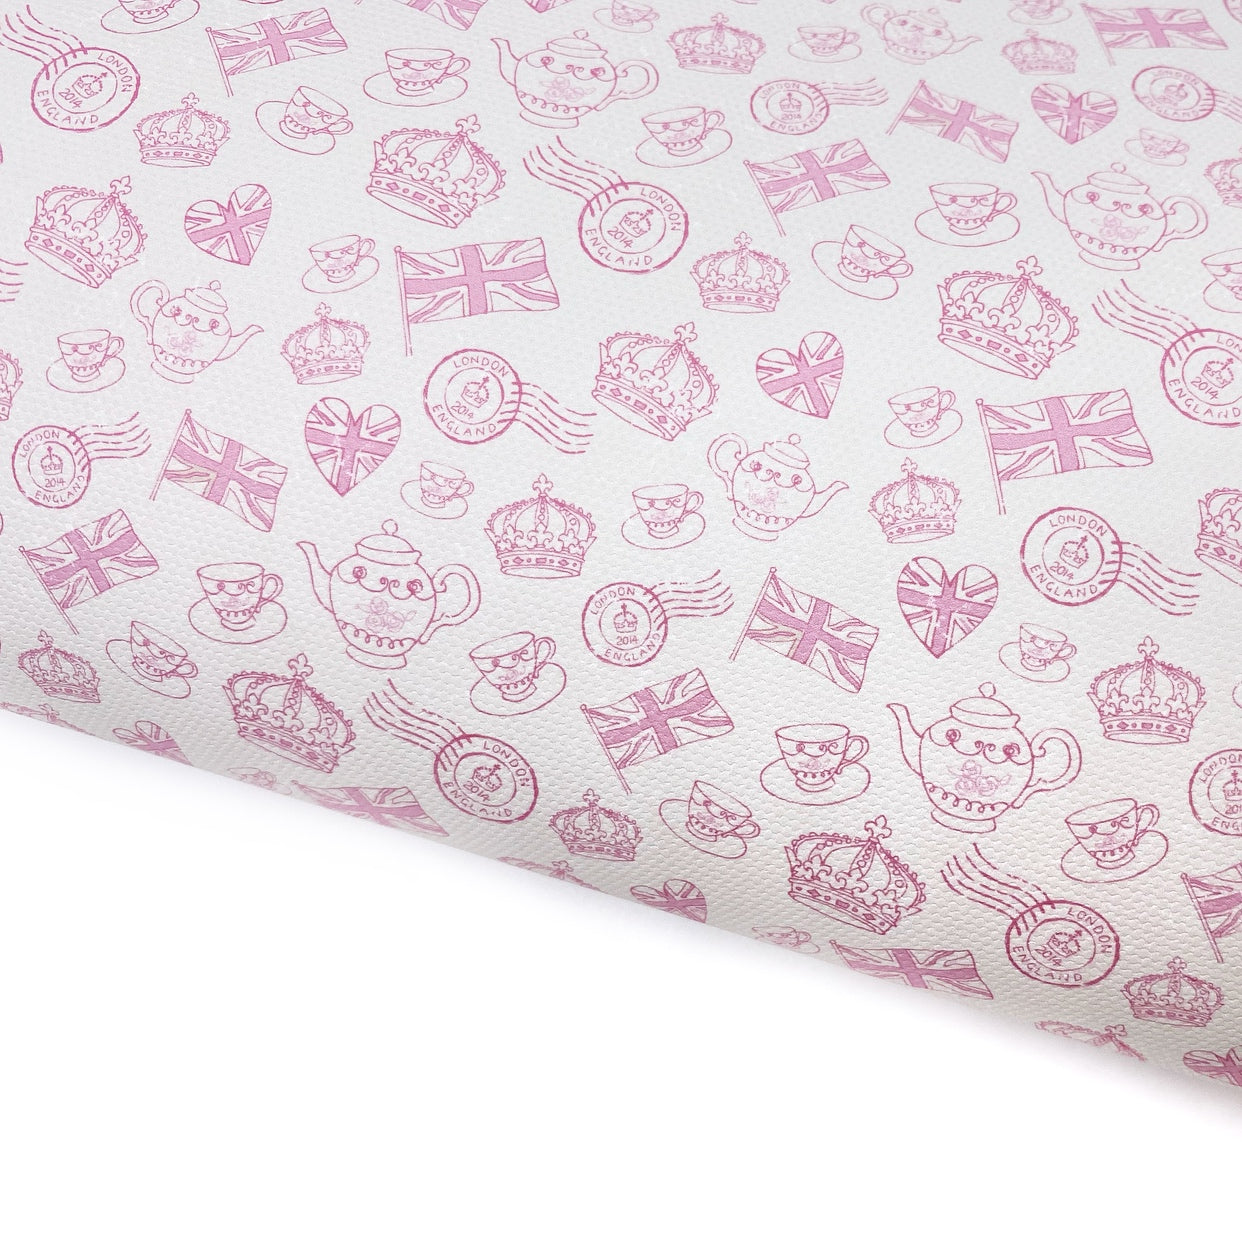 The Queens Tea Party Lux Premium Printed Bow Fabric